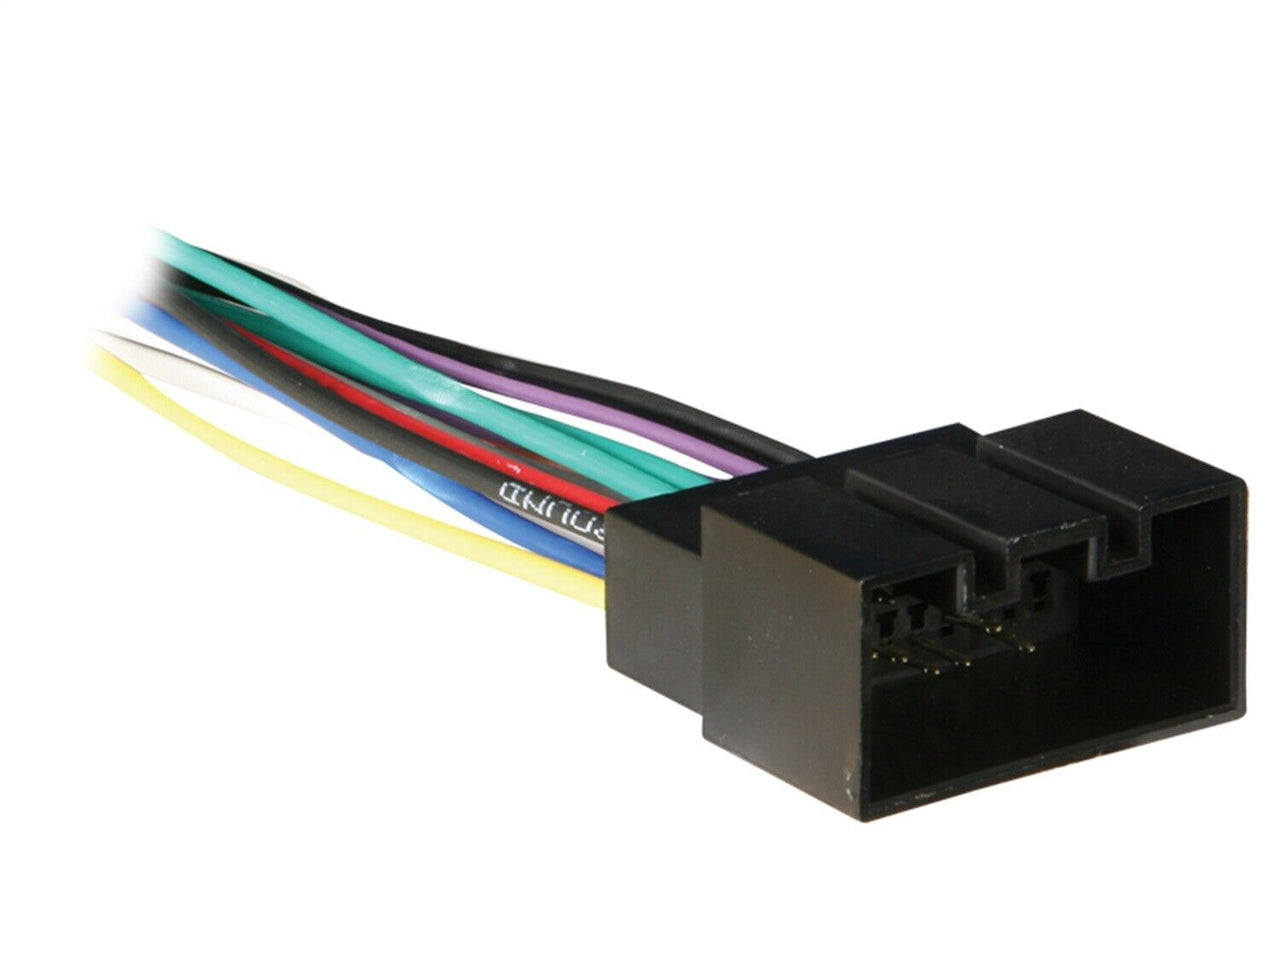 Absolute A9500-9500 20 Pin Wiring Harness Compatible with 2001-Up JAGUAR/ LANDROVER Vehicles